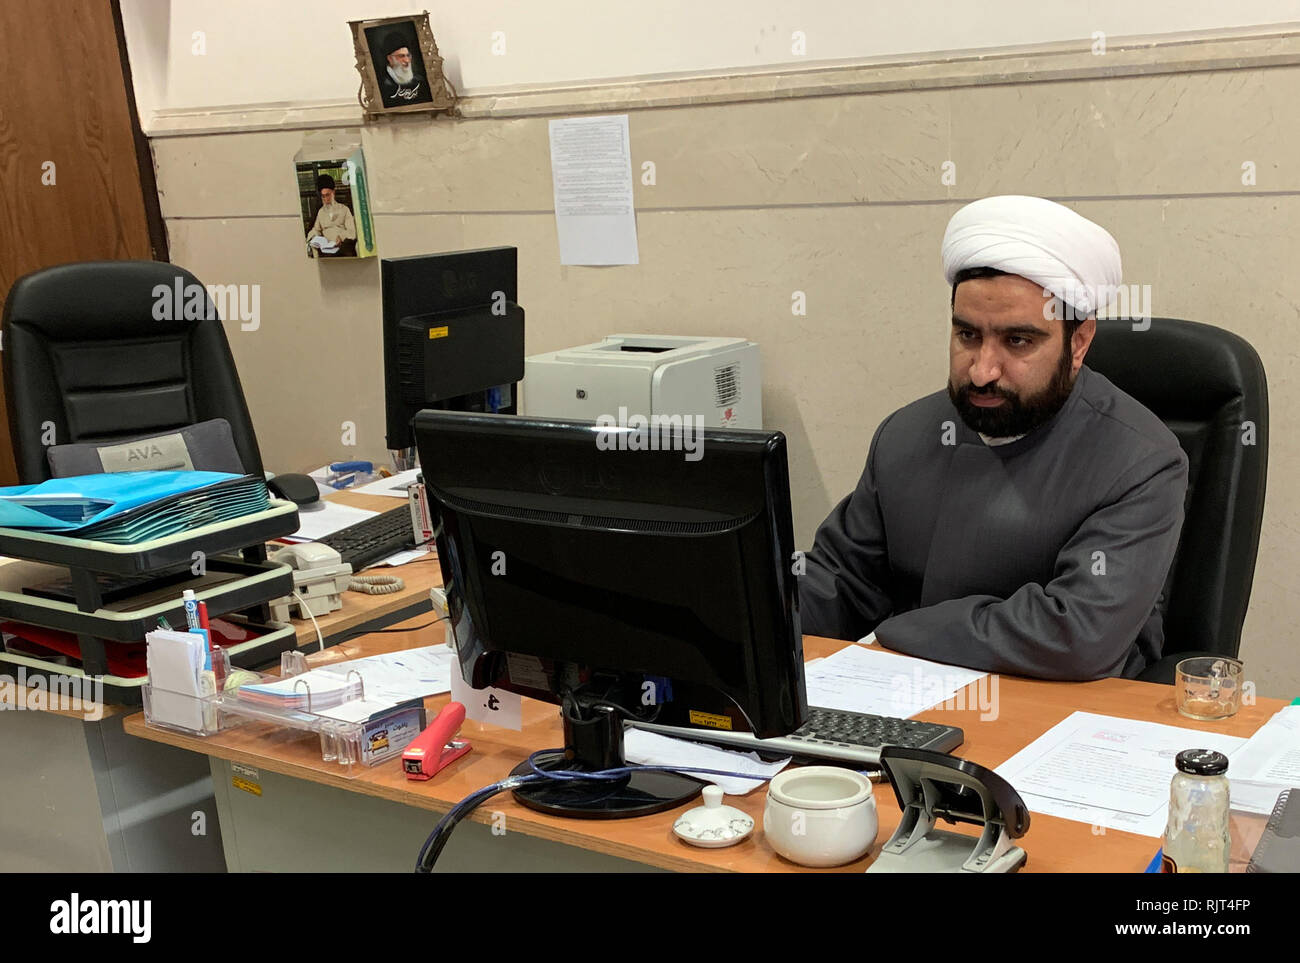 Ghom, Iran. 17th Jan, 2019. An Iranian cleric works on a computer in a Koranic school. Modern technology is also indispensable in the arch-conservative Koran schools in Iran. Where paper and pencil were used a few years ago, clerics and students now work with computers. (to dpa 'Much shadow, little light - Iran's Islamic revolution turns 40' from 08.02.2019) Credit: Farshid Motahari/dpa/Alamy Live News Stock Photo